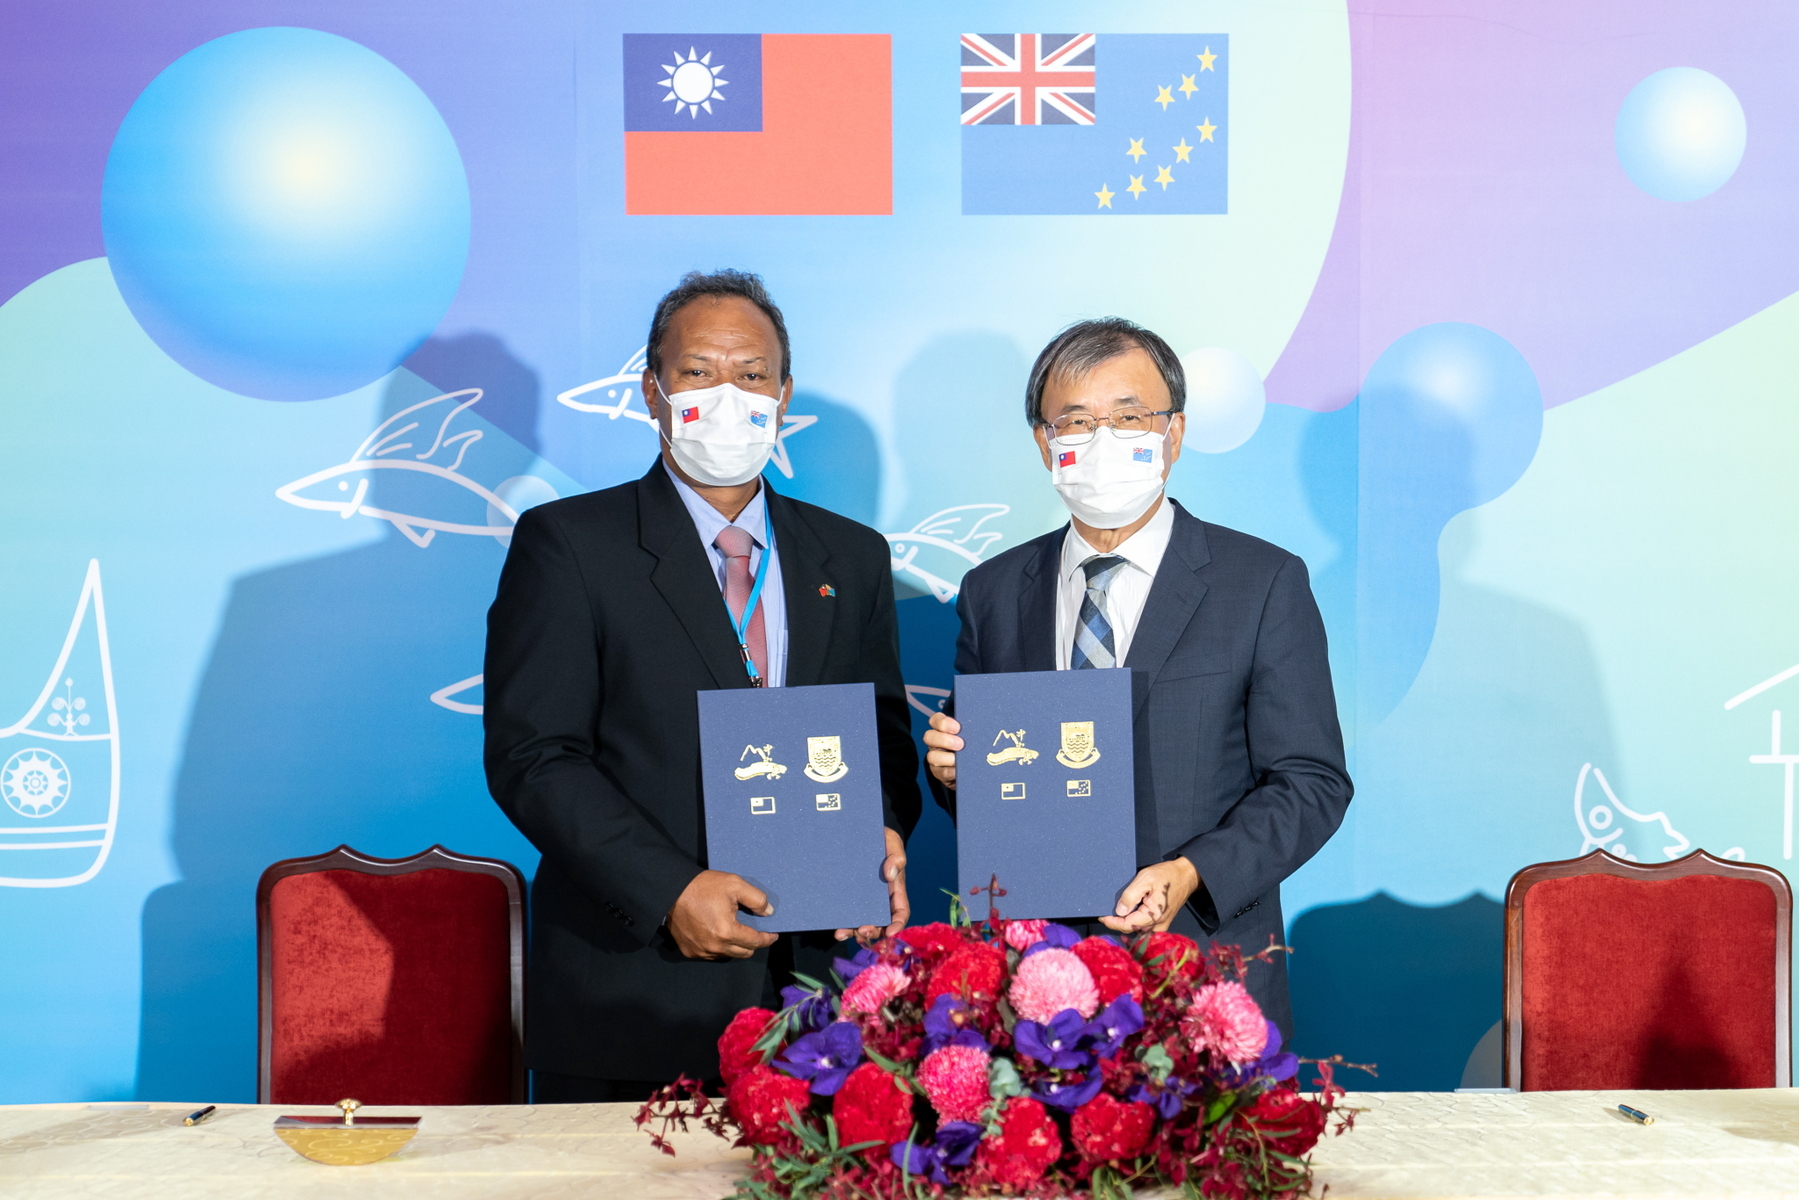 Ying-Yao Cheng, President of National Sun Yat-sen University, signed a Memorandum of Understanding with Ampelosa Manoa Tehulu, the Minister of Public Works, Infrastructure and Environment of Tuvalu. (Credit: Ministry of Foreign Affairs)